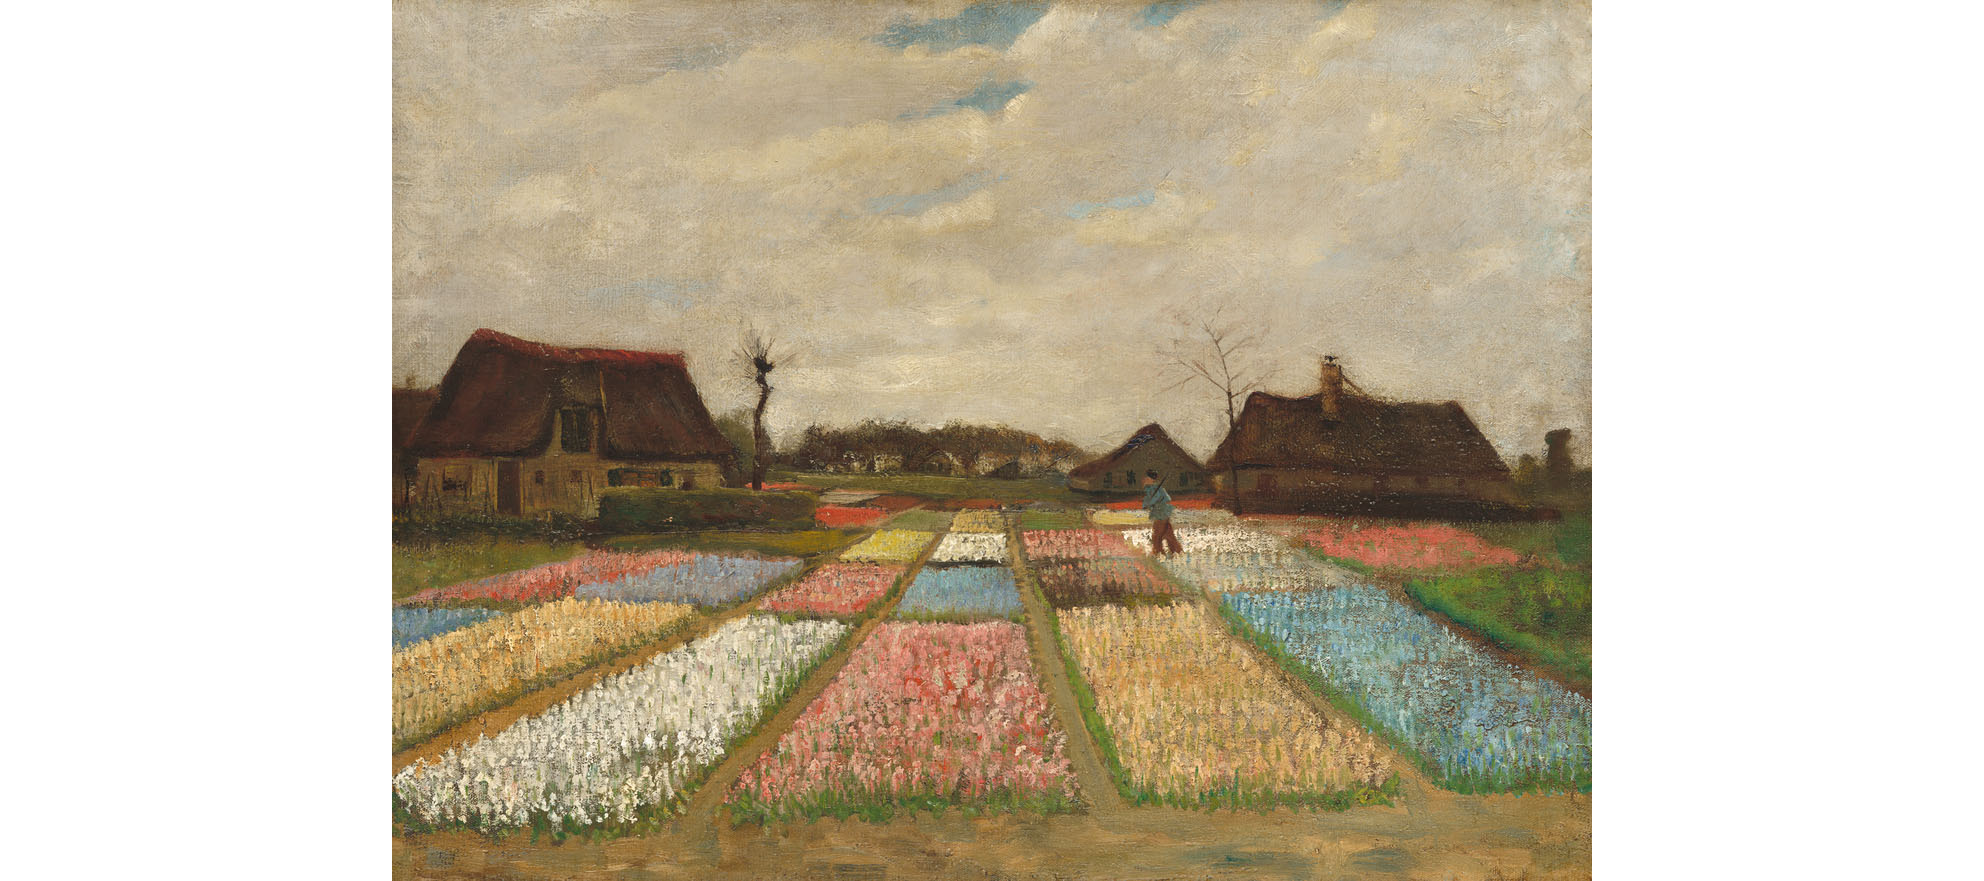 Flower Beds in Holland by Vincent Van Gogh c. 1883. National Gallery of Art